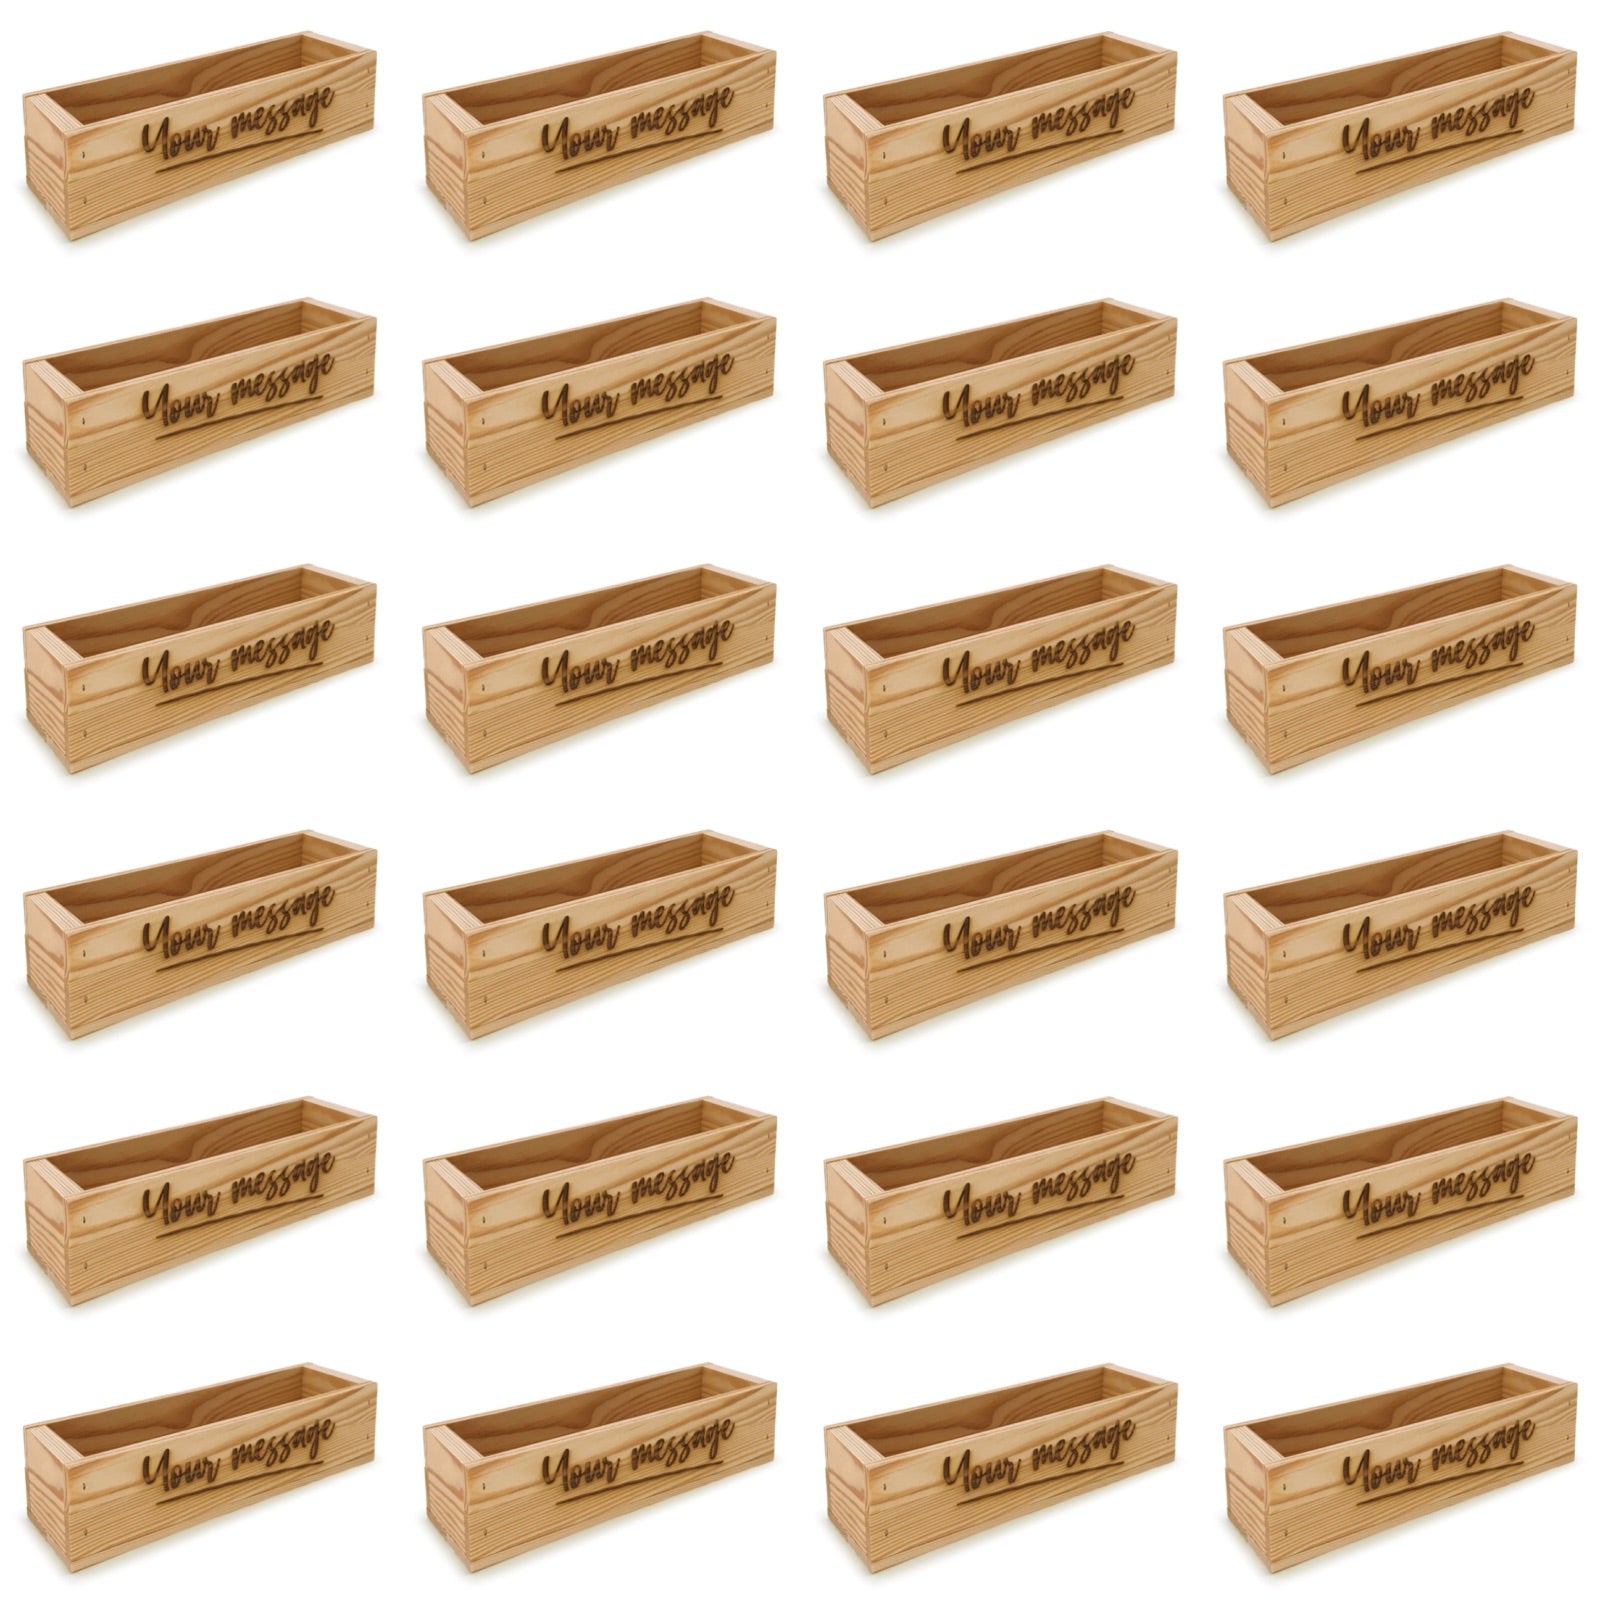 24 Single bottle wine crates with custom message 13x3.5x3.5